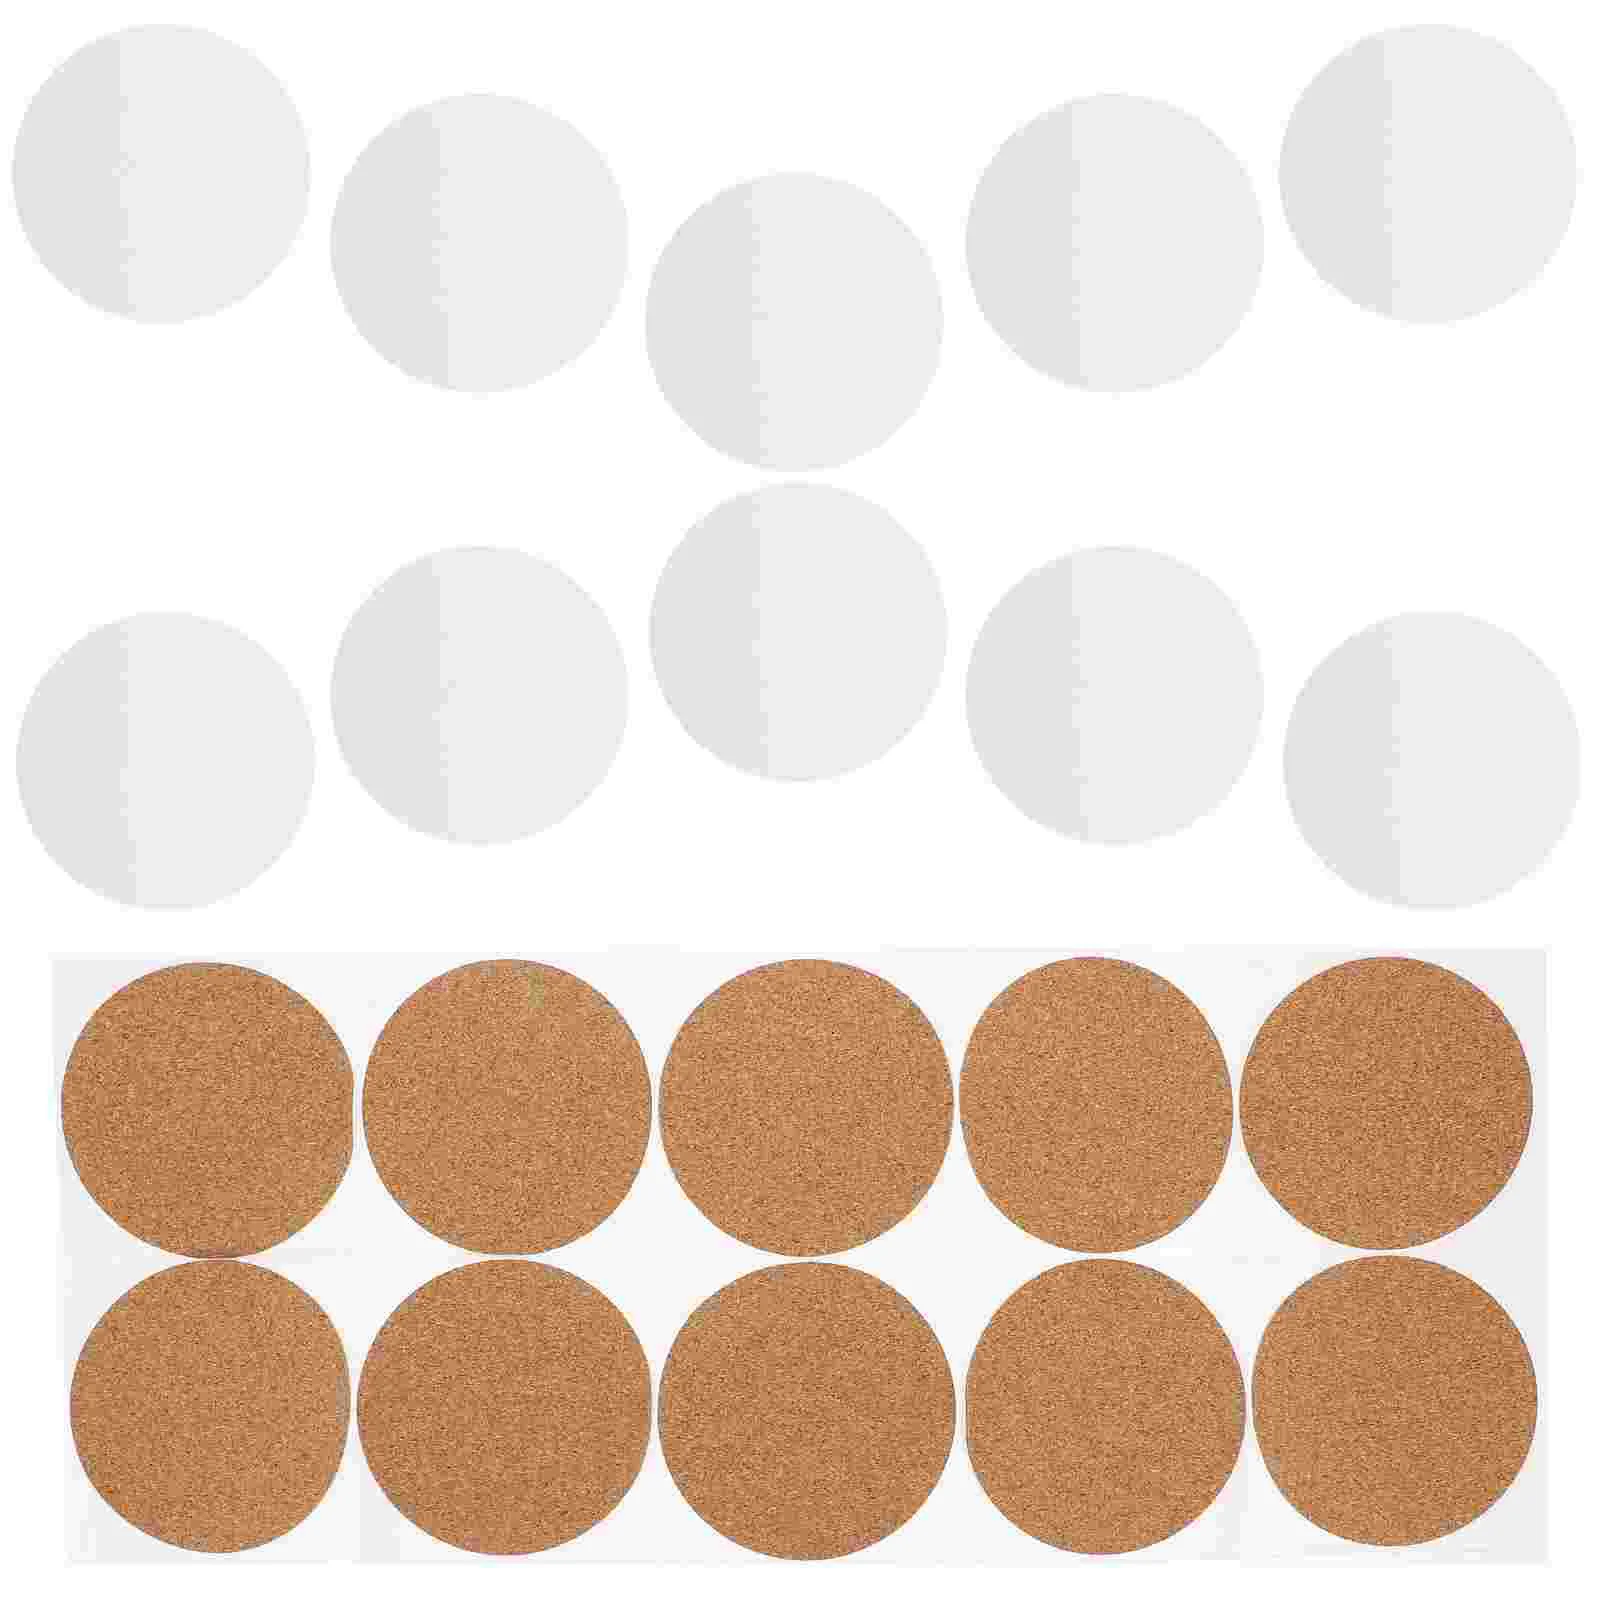 

10 Set Diy Cup Mats DIY Round Plate Coaster Anti-scald Insulation Pads Sublimation Paper Tableware